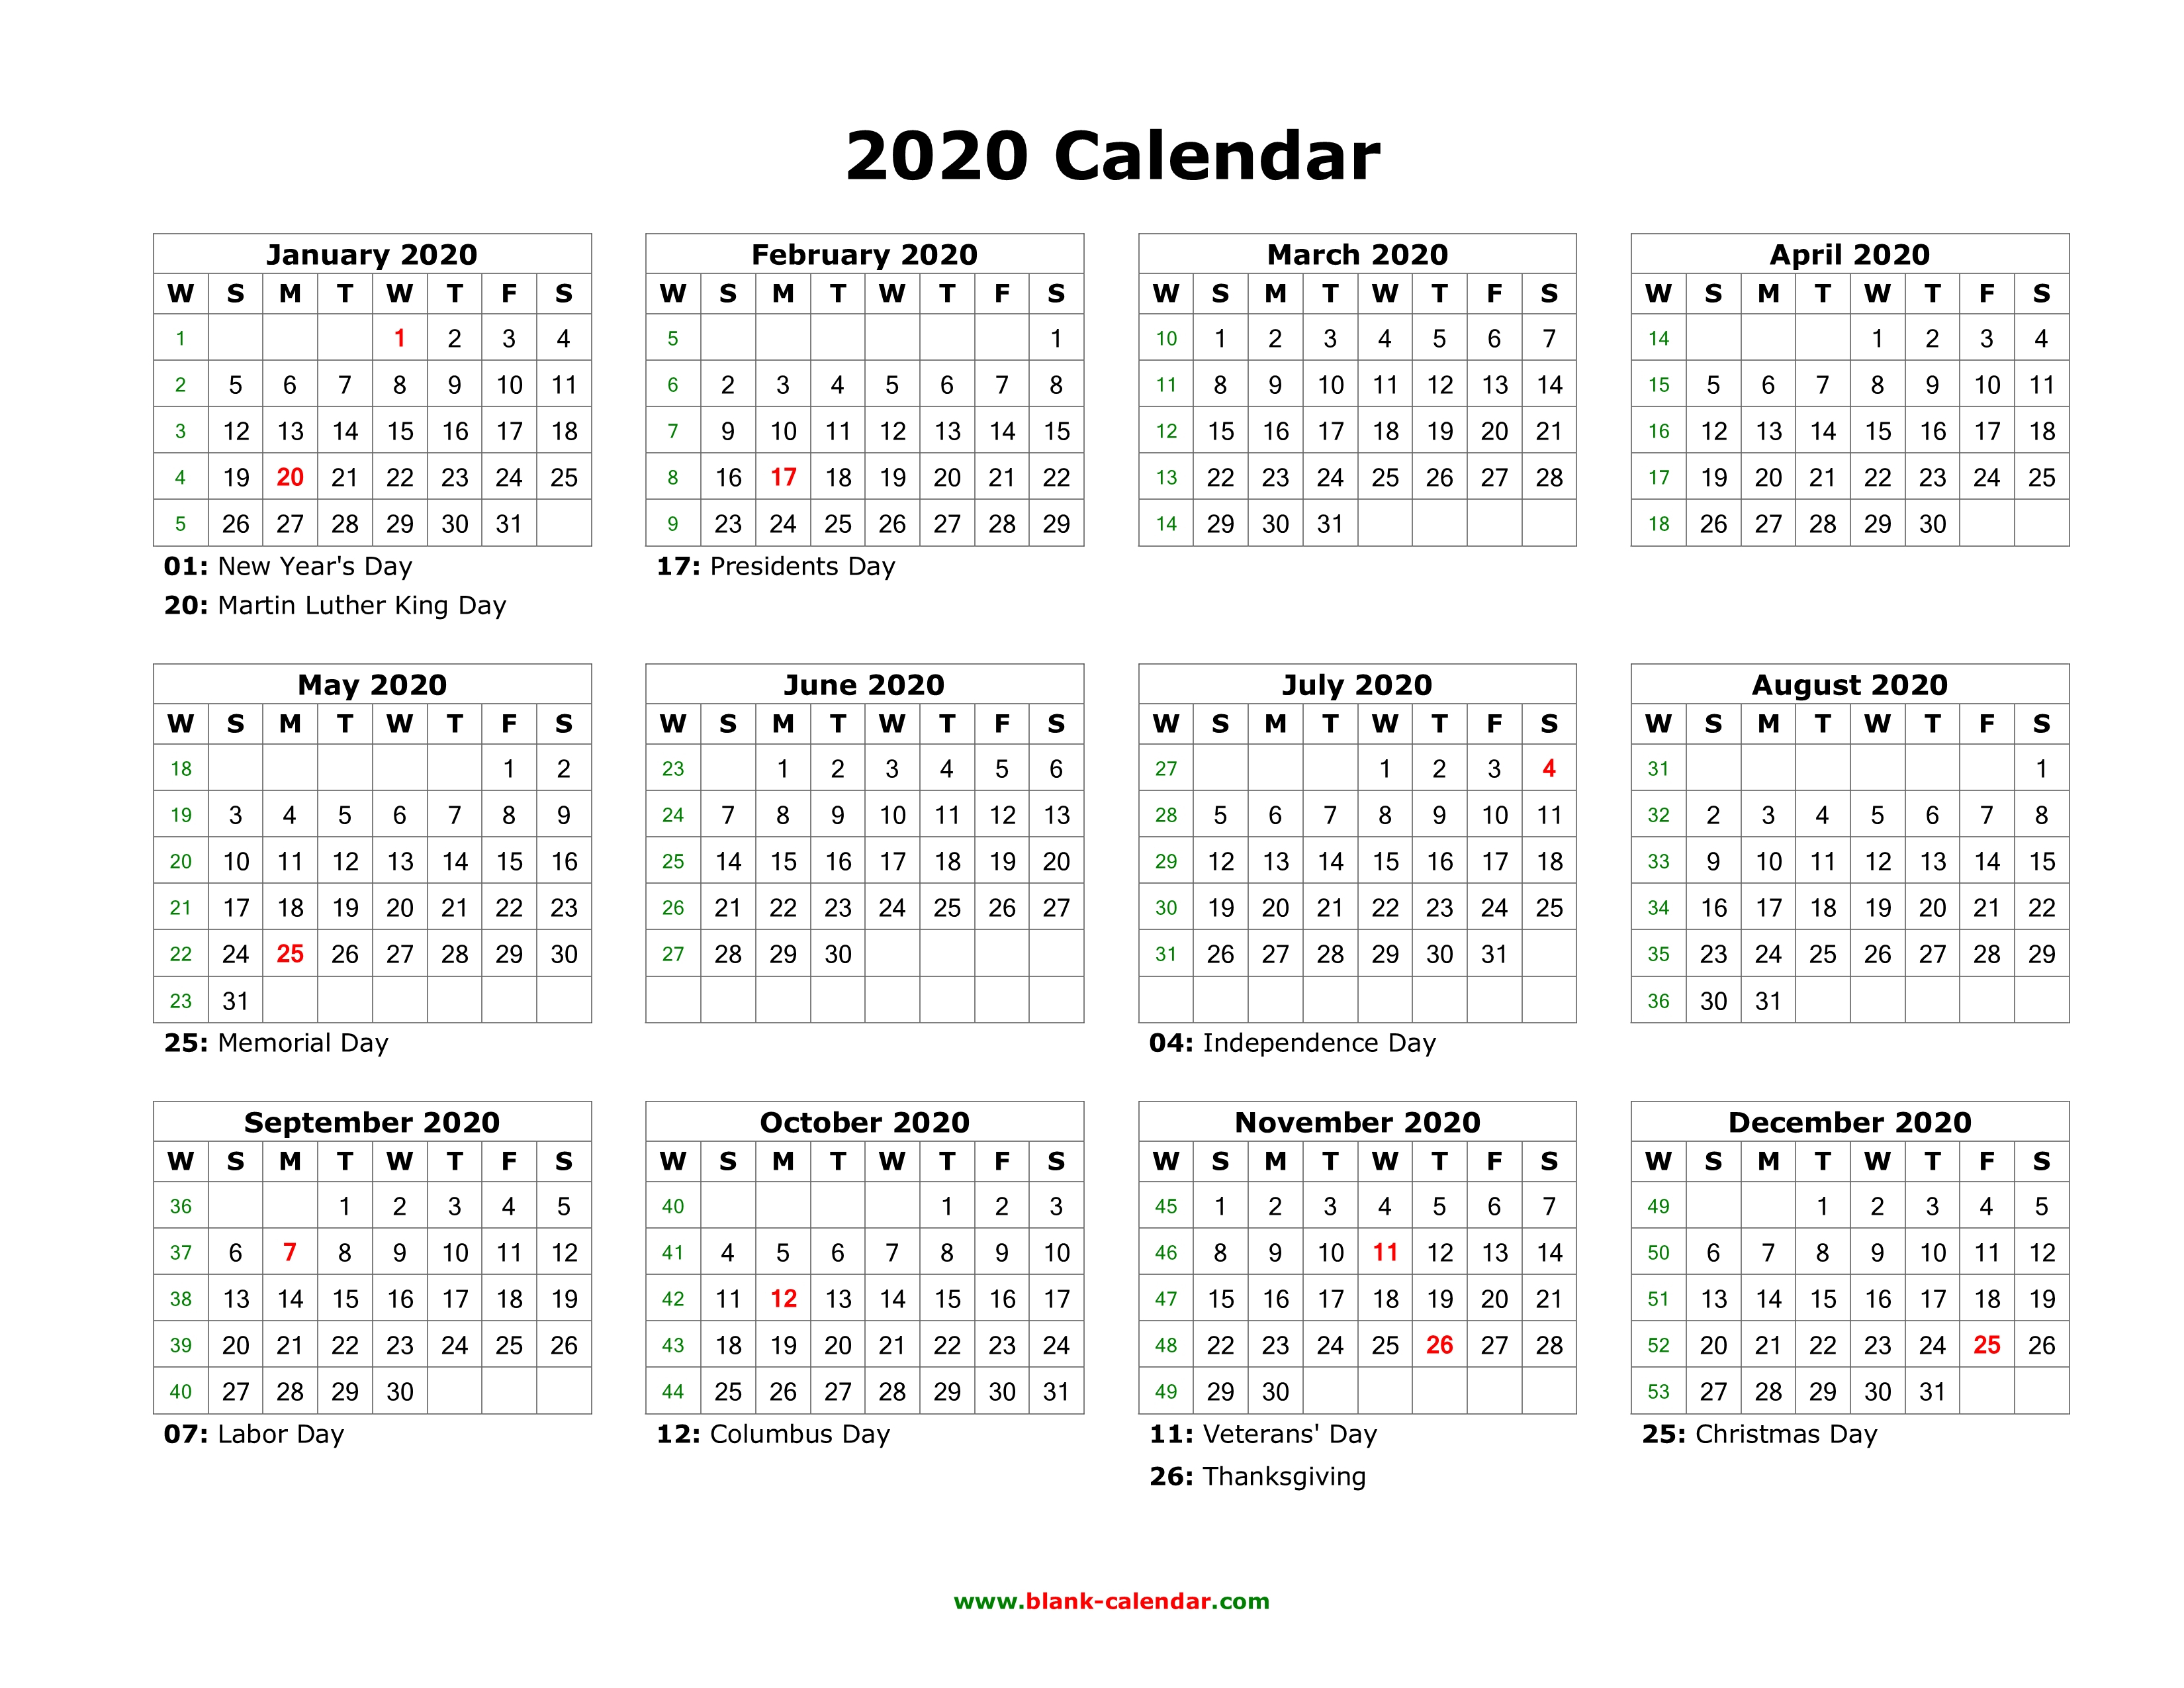 Download Blank Calendar 2020 With Us Holidays (12 Months On